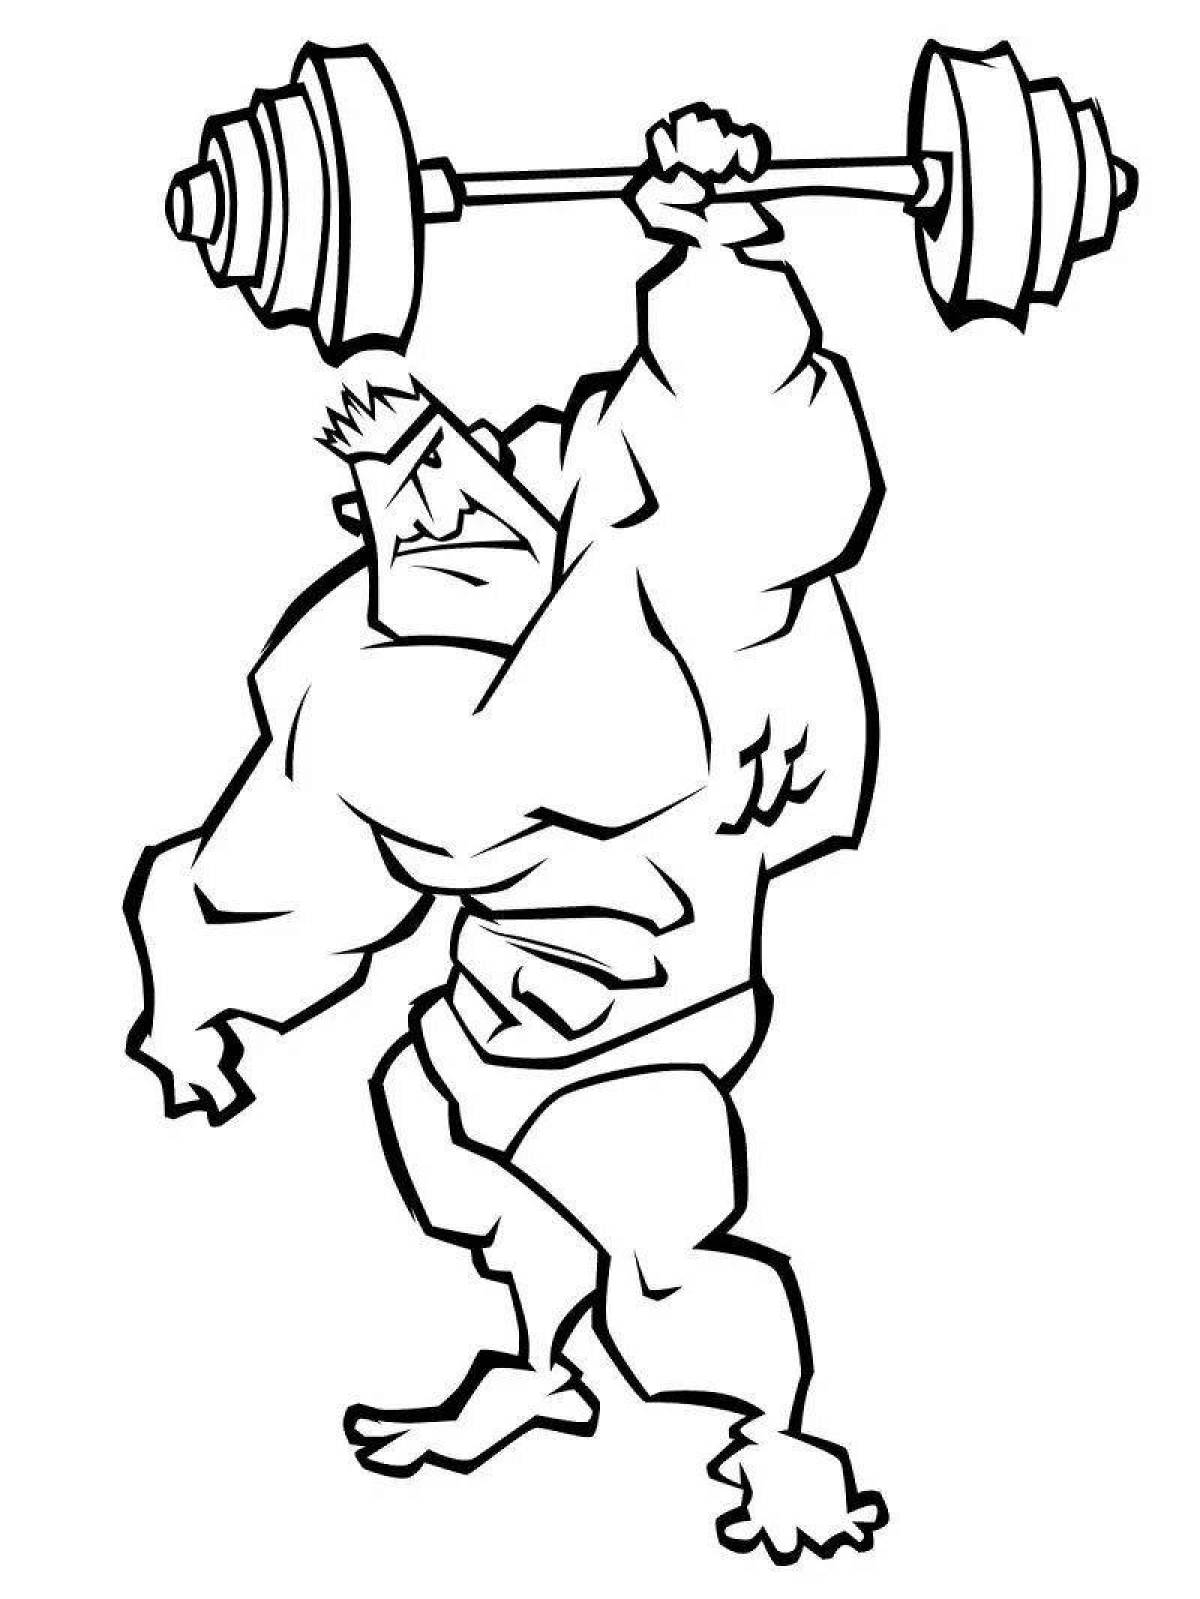 Coloring book brave weightlifter